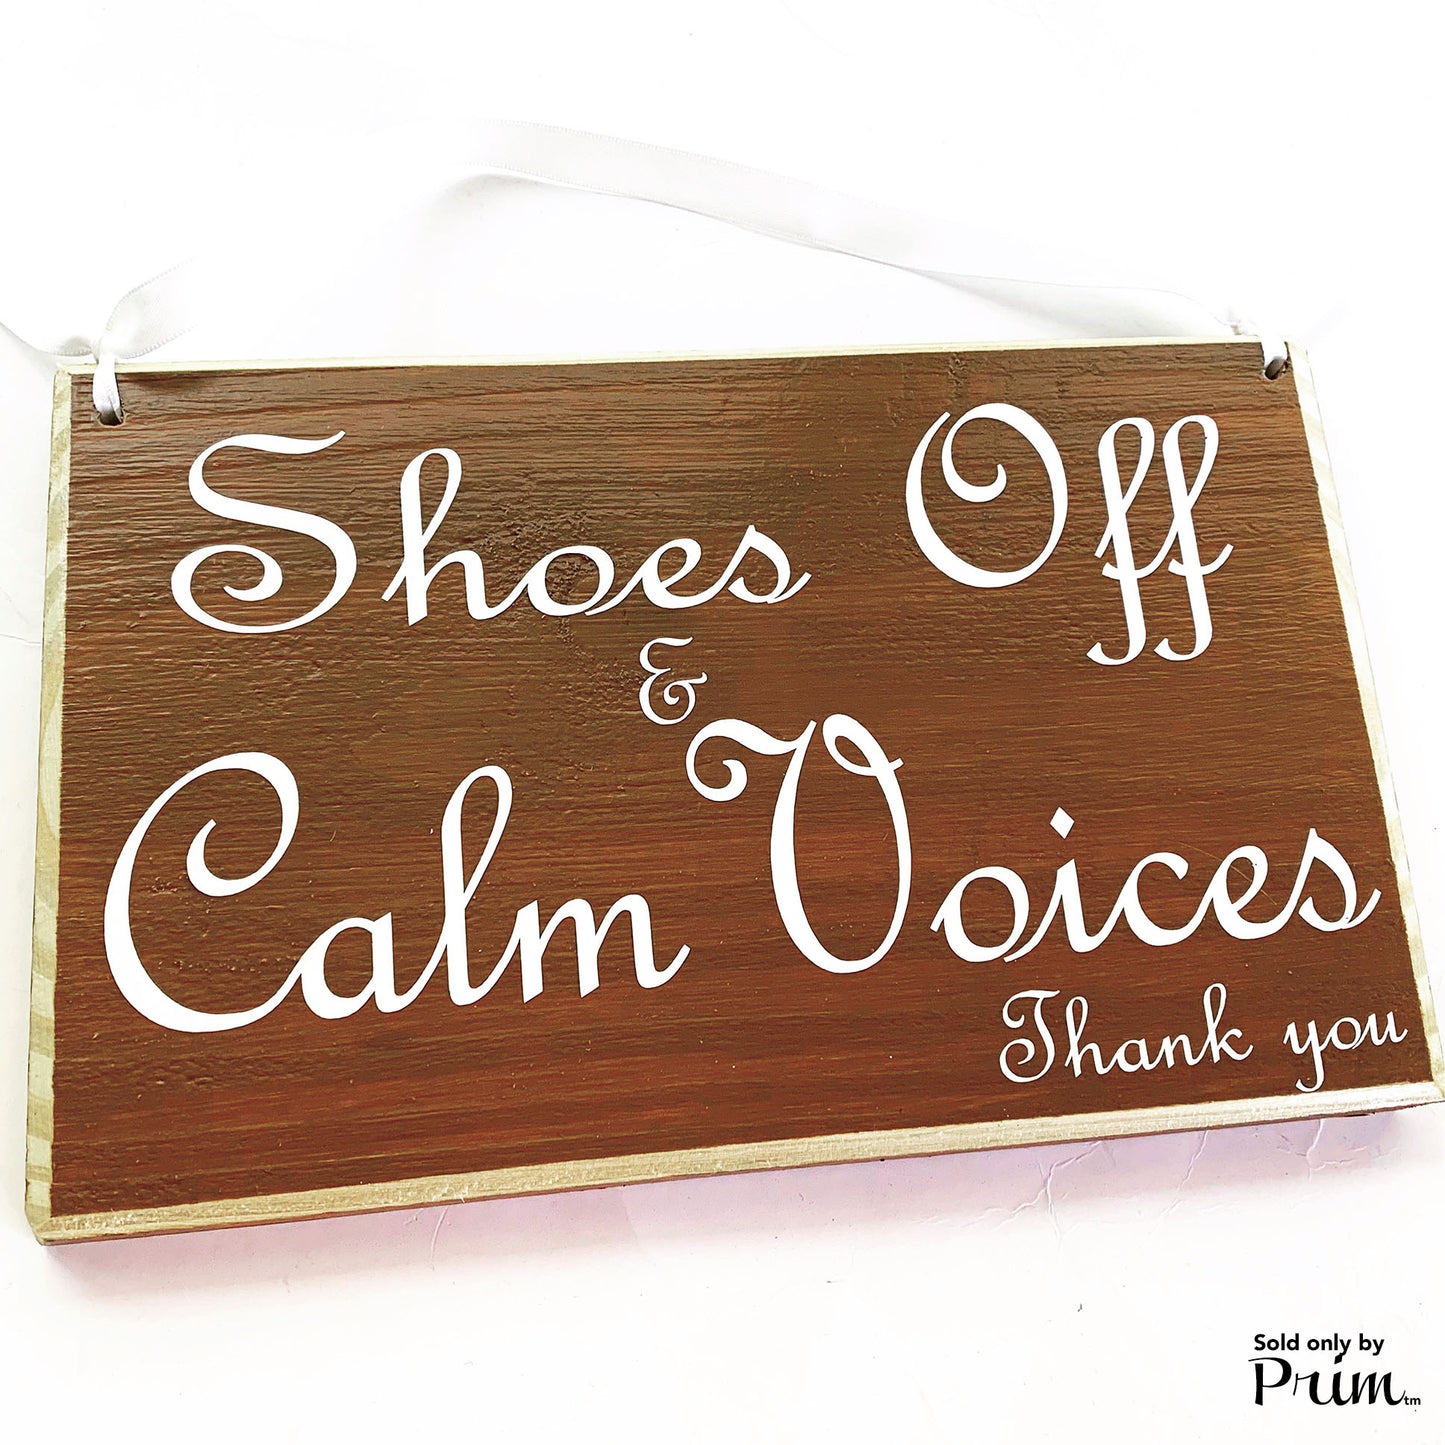 10x6 Shoes Off and Calm Voices Custom Wood sign Please Remove Your Shoes Welcome Plaque